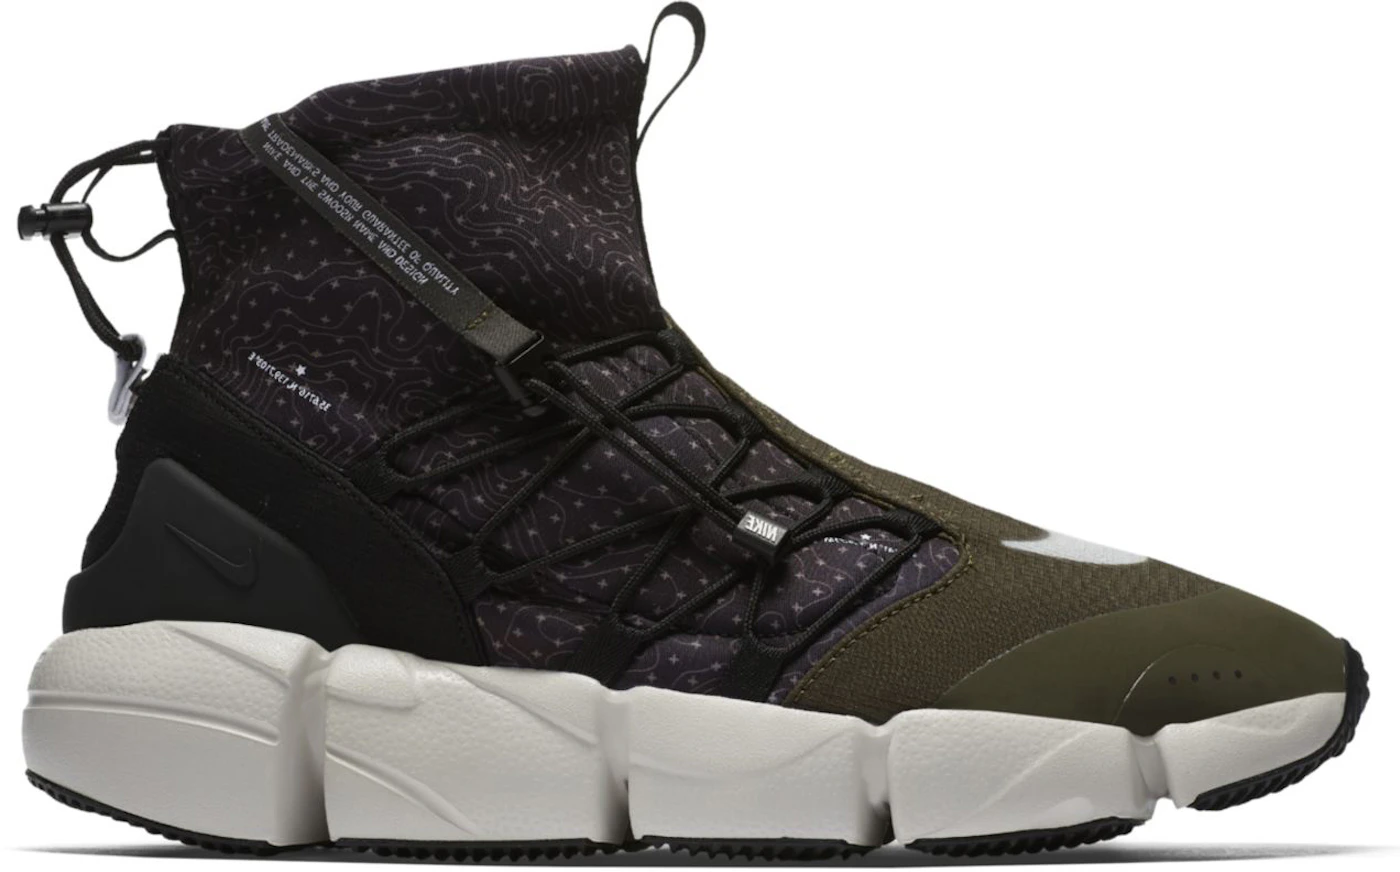 Nike Air Footscape Mid Utility Cargo Men's - 924455-001 -